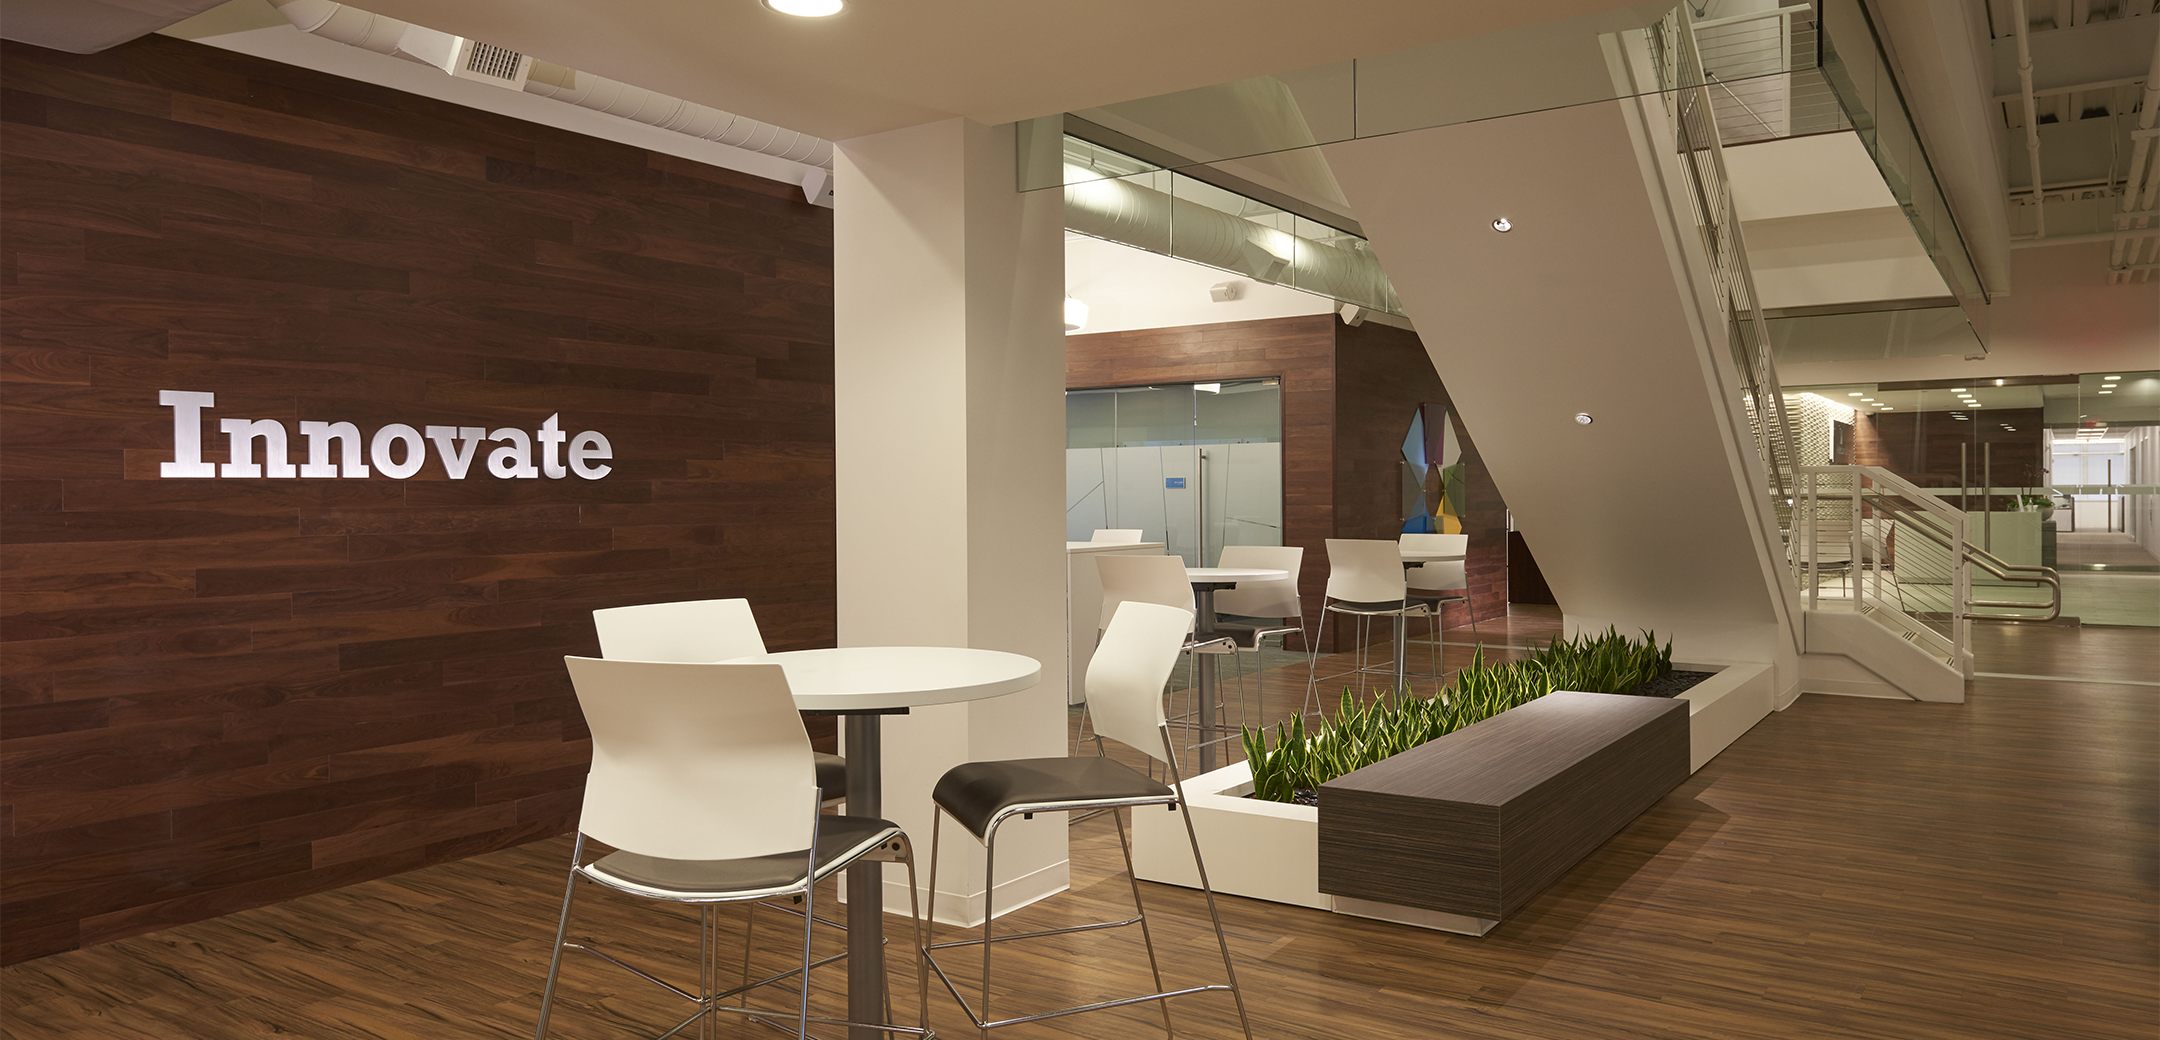 The interior space of Amerisource Bergen featuring an upwards staircase and lobby seating in a wood floors and accent environment next to an Innovate sign on the wall.